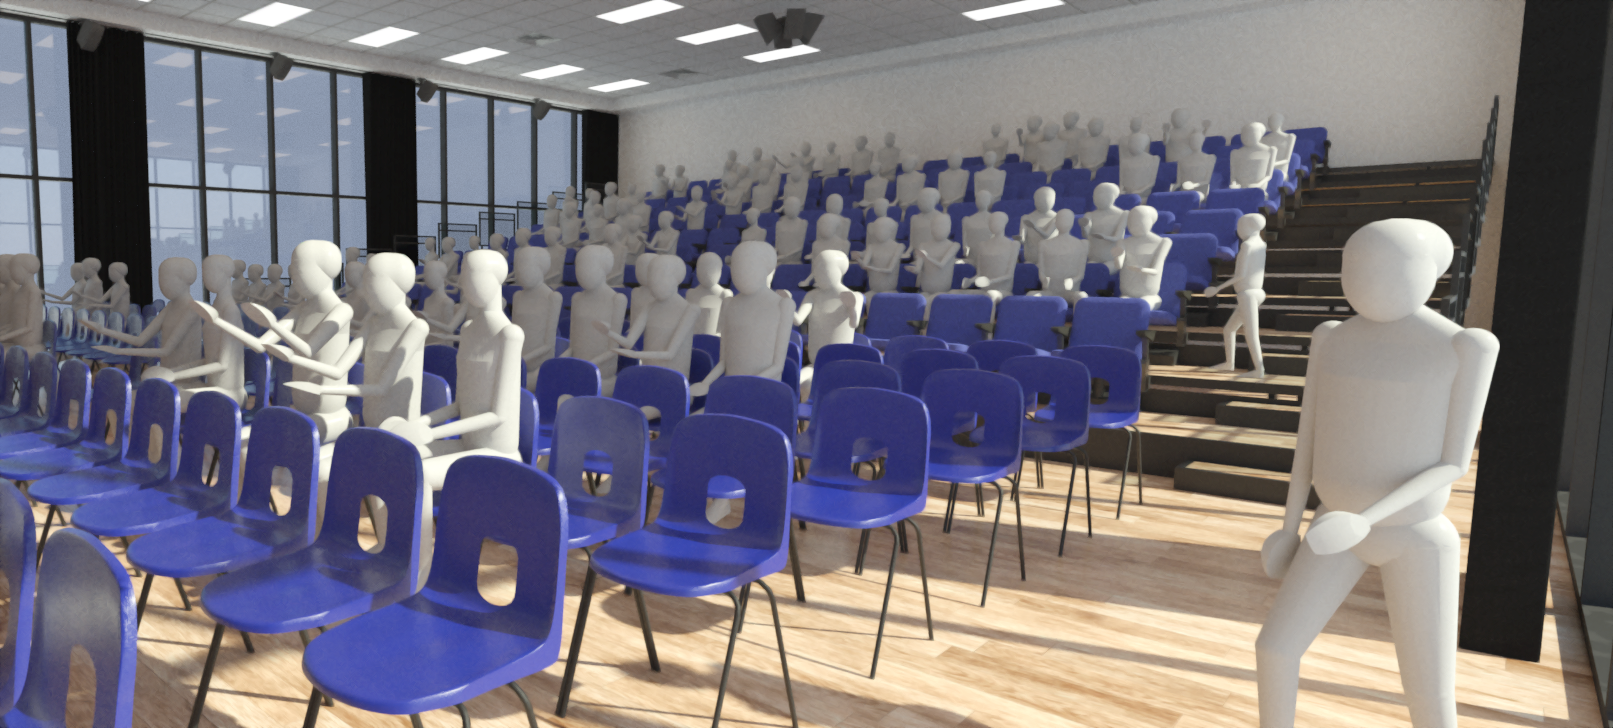 Revit render showing assembly hall content.